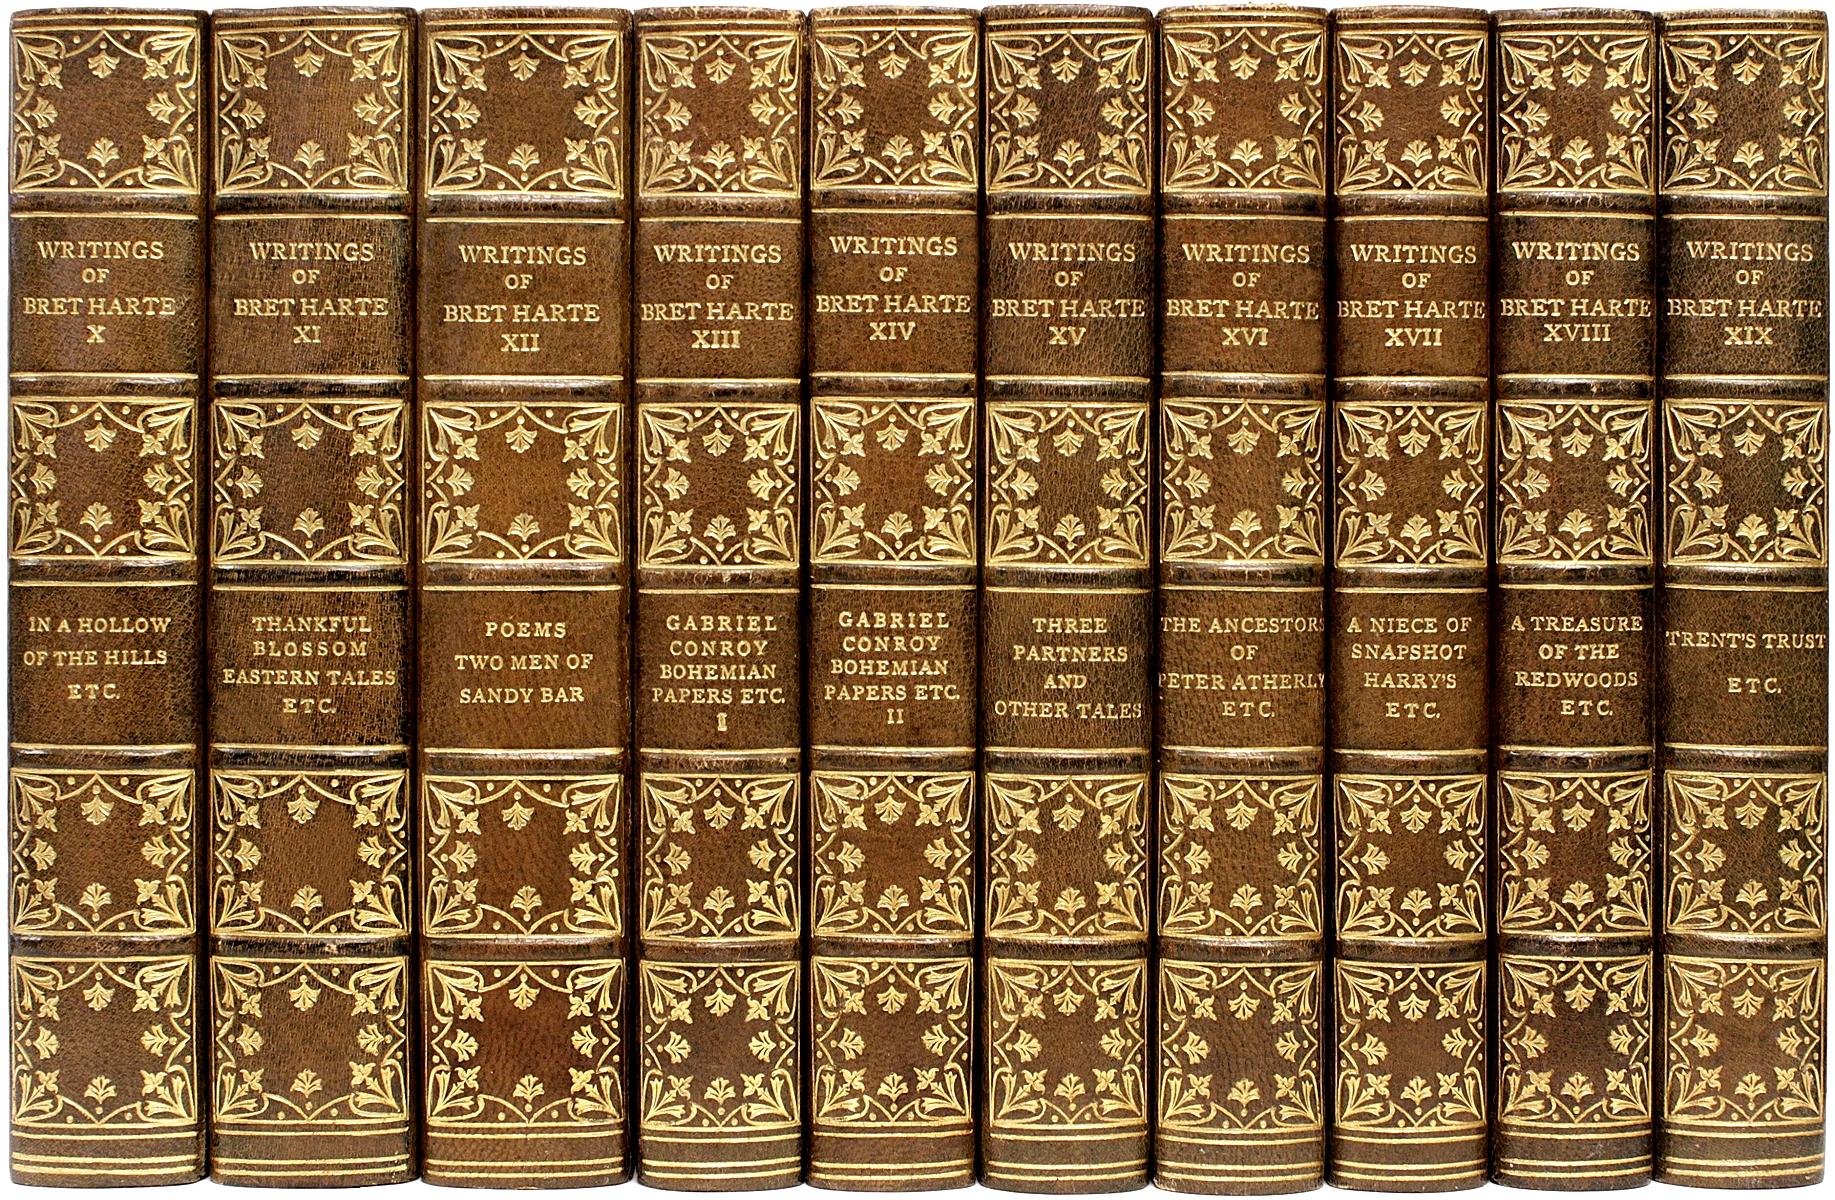 Author: HARTE, Bret. 

Title: The Complete Writings of Bret Harte.

Publisher: Boston: Houghton Mifflin Co., 1899.

THE RIVERSIDE EDITION. 19 vols., 7-5/8